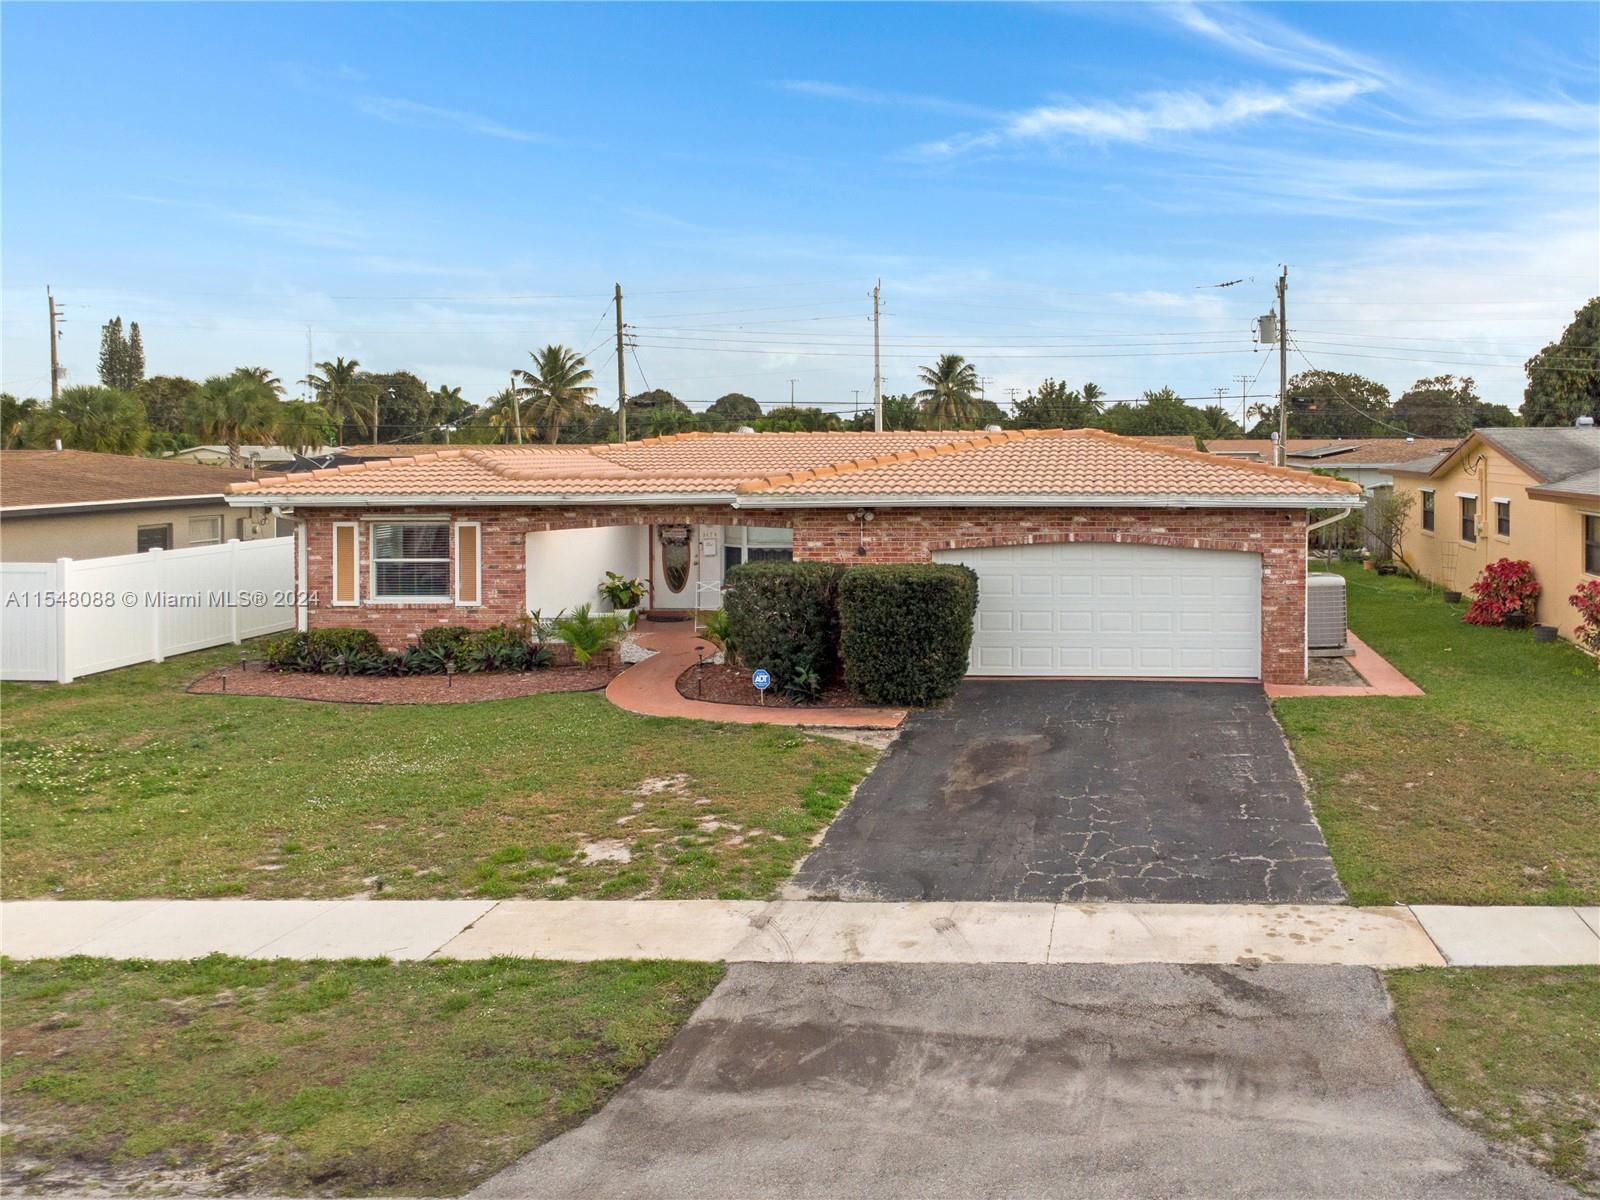 Photo of 3478 NW 25th St in Lauderdale Lakes, FL